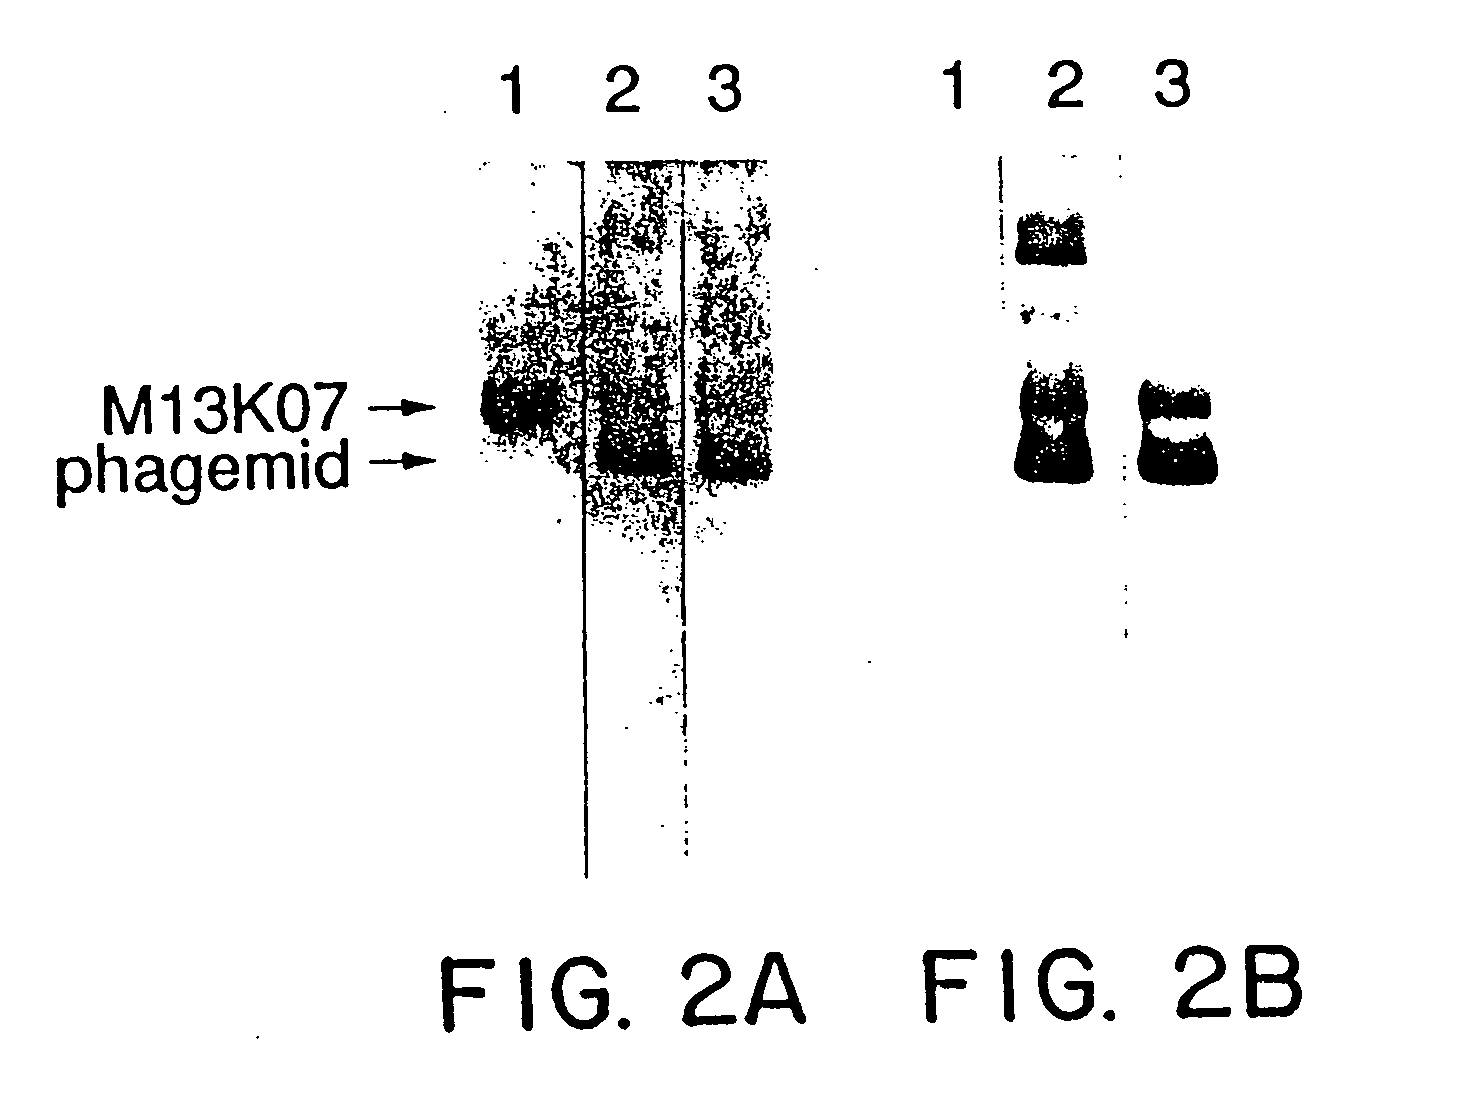 Enrichment method for variant proteins with altered binding properties